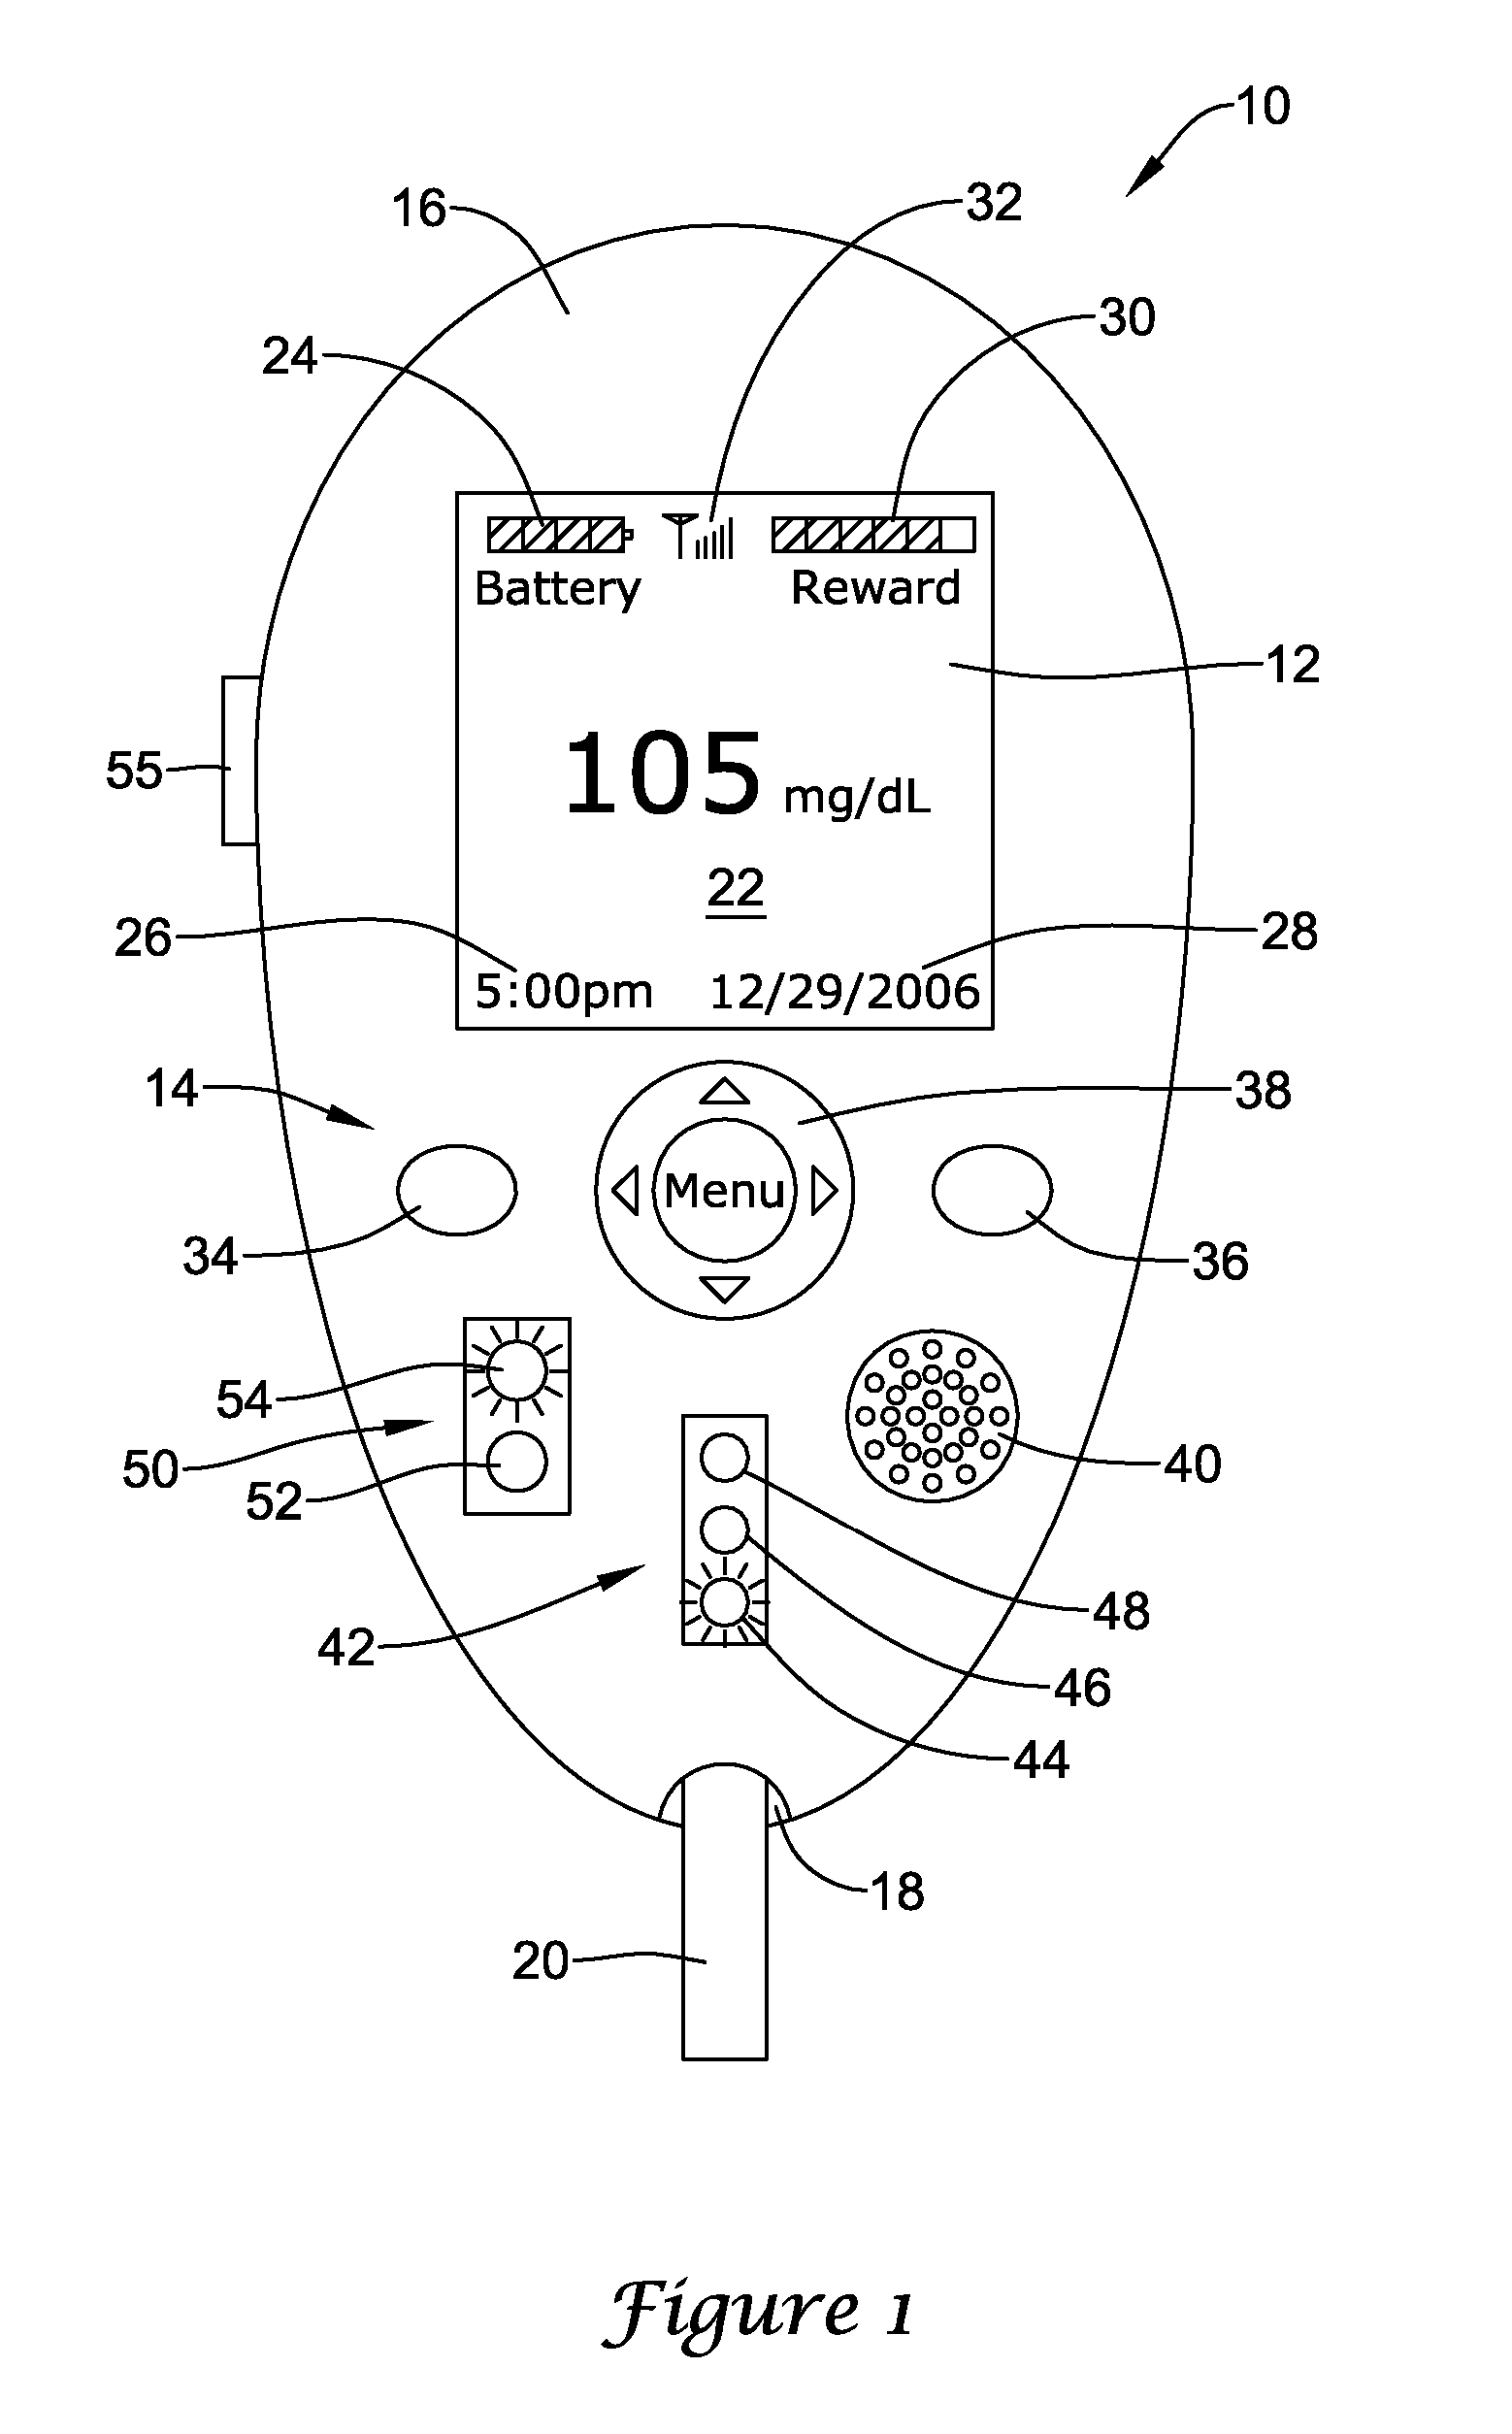 Combined peripheral and health monitoring devices